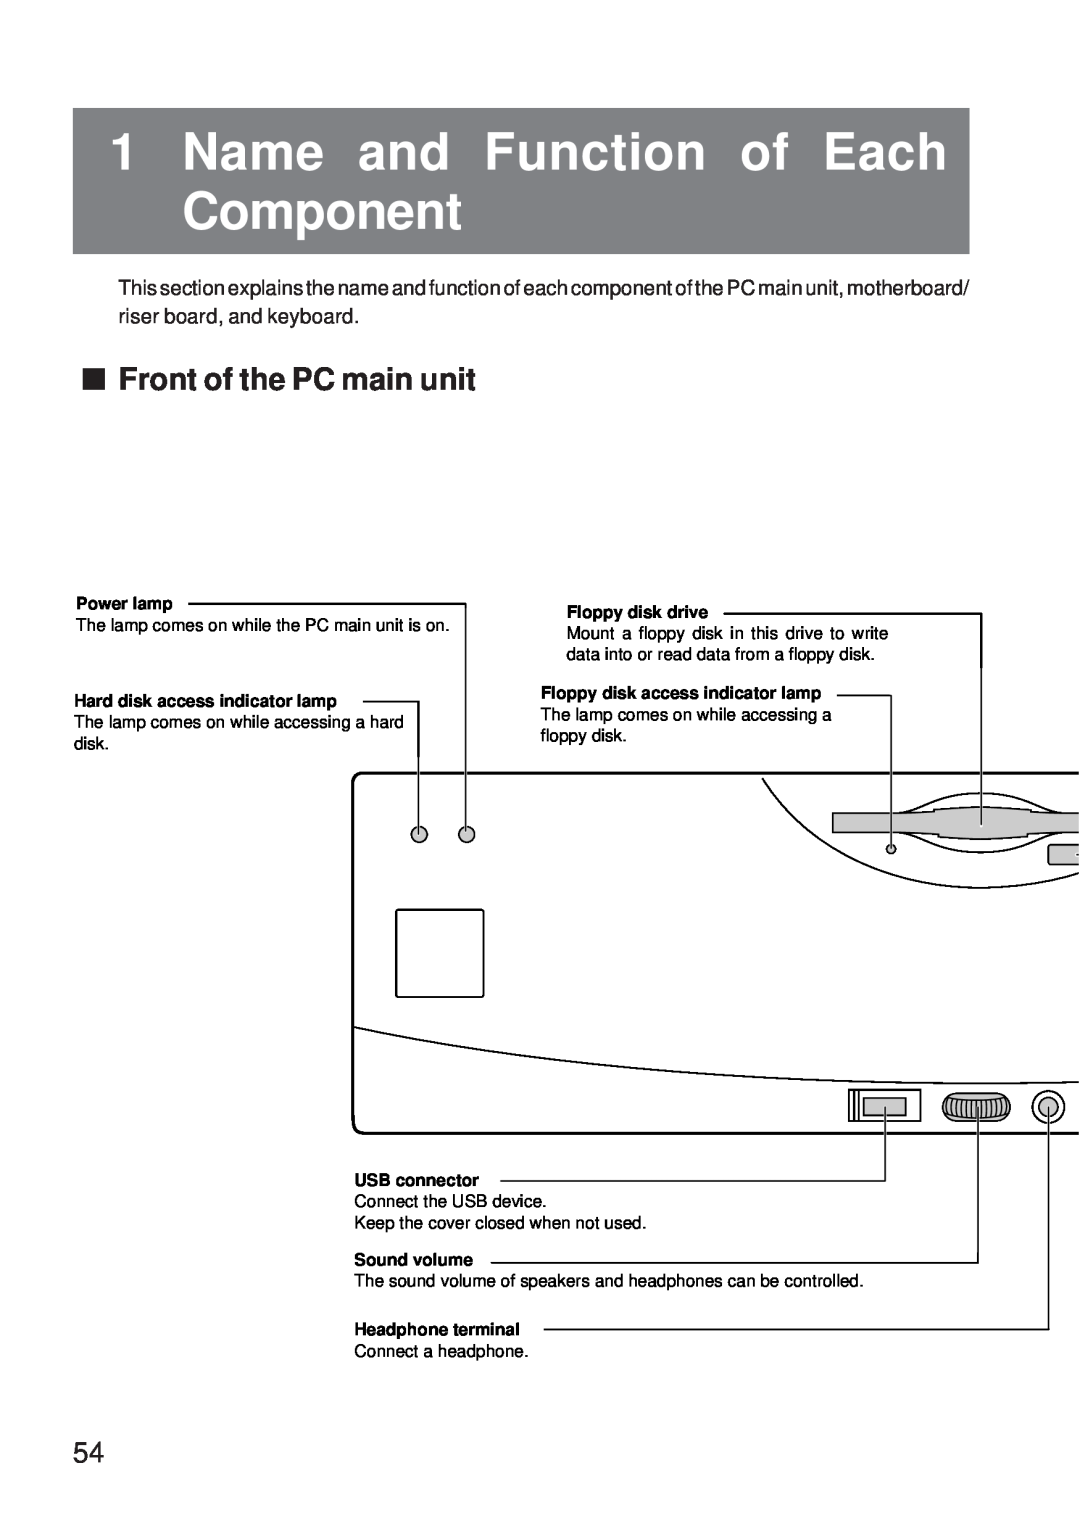 Fujitsu 5000 user manual Name and Function of Each Component, Front of the PC main unit 